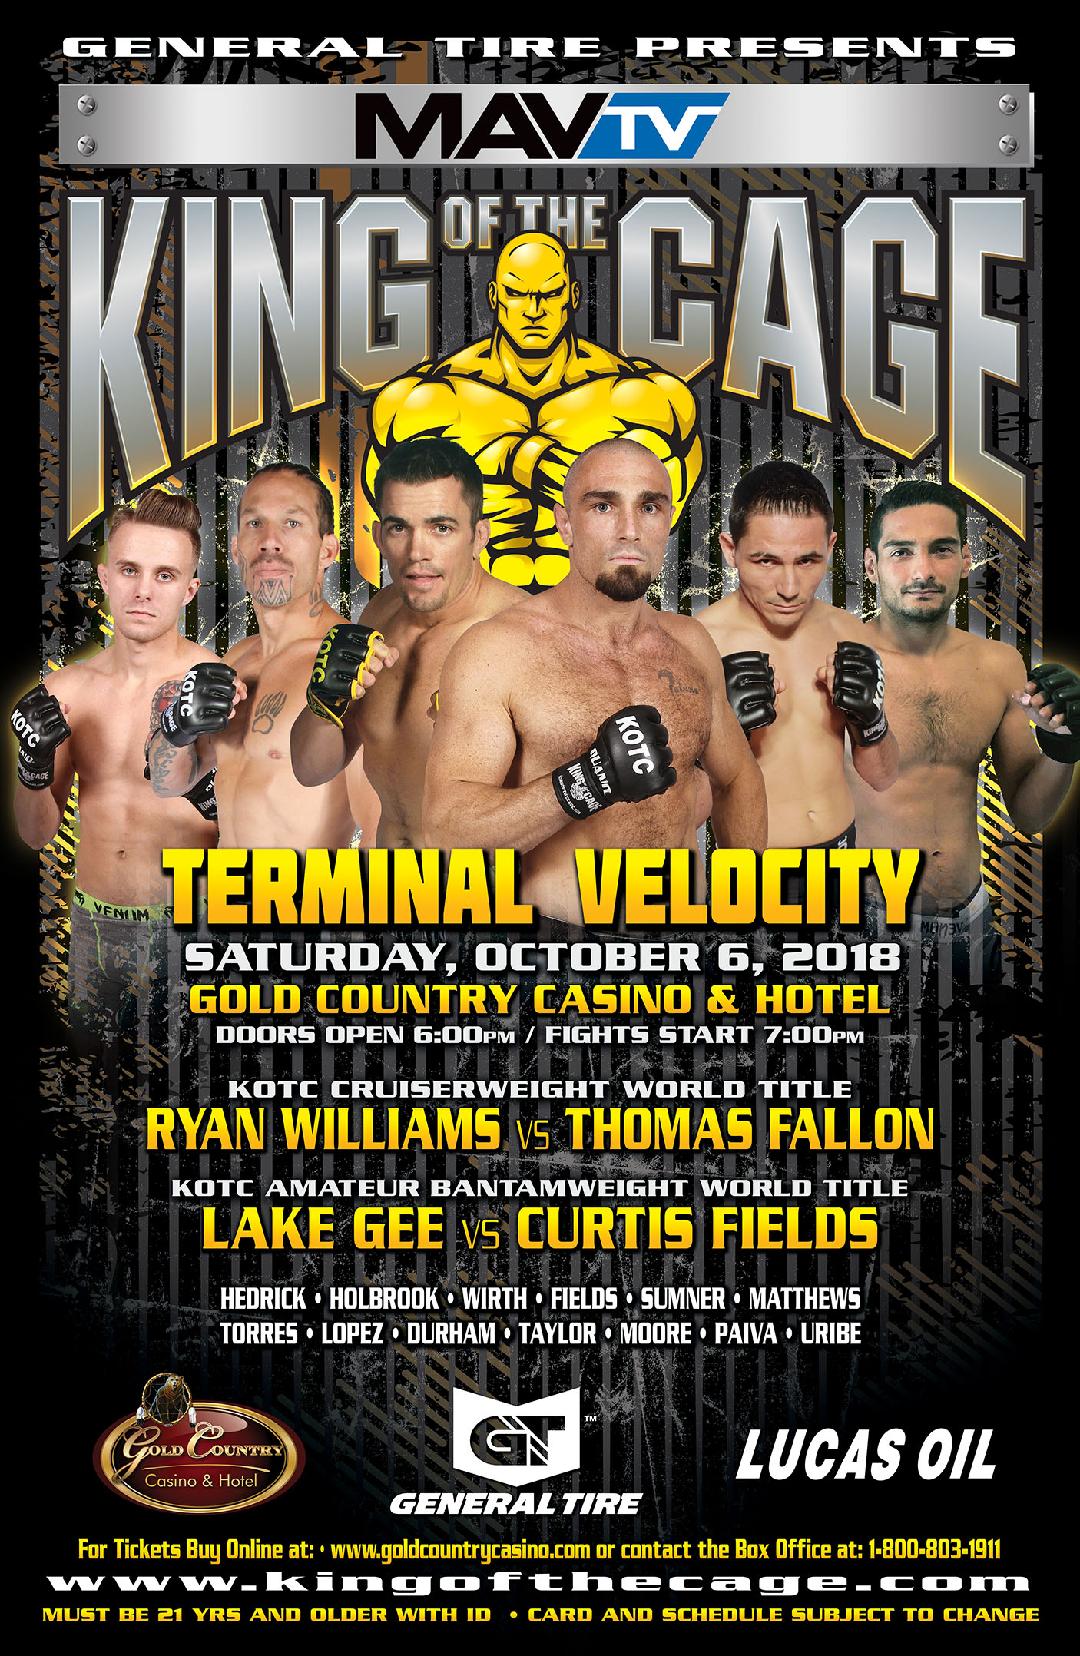 King of the Cage Announces Main Fight Card for Gold Country Casino & Hotel October 6 “TERMINAL VELOCITY”